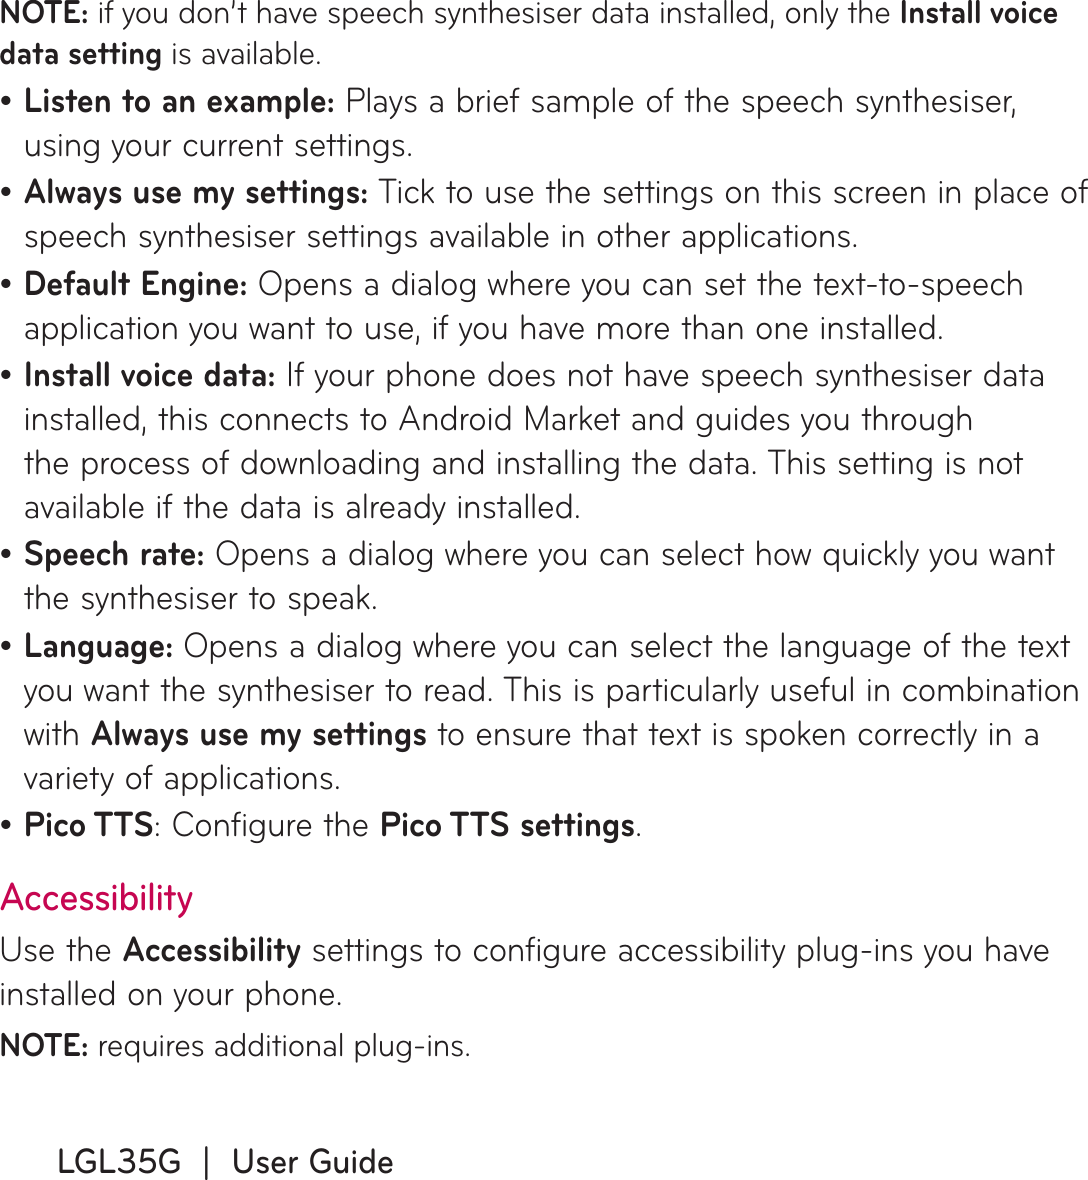 LGL35G  |  User GuideNOTE: if you don’t have speech synthesiser data installed, only the Install voice data setting is available.Listen to an example: Plays a brief sample of the speech synthesiser, using your current settings.Always use my settings: Tick to use the settings on this screen in place of speech synthesiser settings available in other applications.Default Engine: Opens a dialog where you can set the text-to-speech application you want to use, if you have more than one installed.Install voice data: If your phone does not have speech synthesiser data installed, this connects to Android Market and guides you through the process of downloading and installing the data. This setting is not available if the data is already installed.Speech rate: Opens a dialog where you can select how quickly you want the synthesiser to speak.Language: Opens a dialog where you can select the language of the text you want the synthesiser to read. This is particularly useful in combination with Always use my settings to ensure that text is spoken correctly in a variety of applications.Pico TTS: Configure the Pico TTS settings.AccessibilityUse the Accessibility settings to configure accessibility plug-ins you have installed on your phone.NOTE: requires additional plug-ins.•••••••